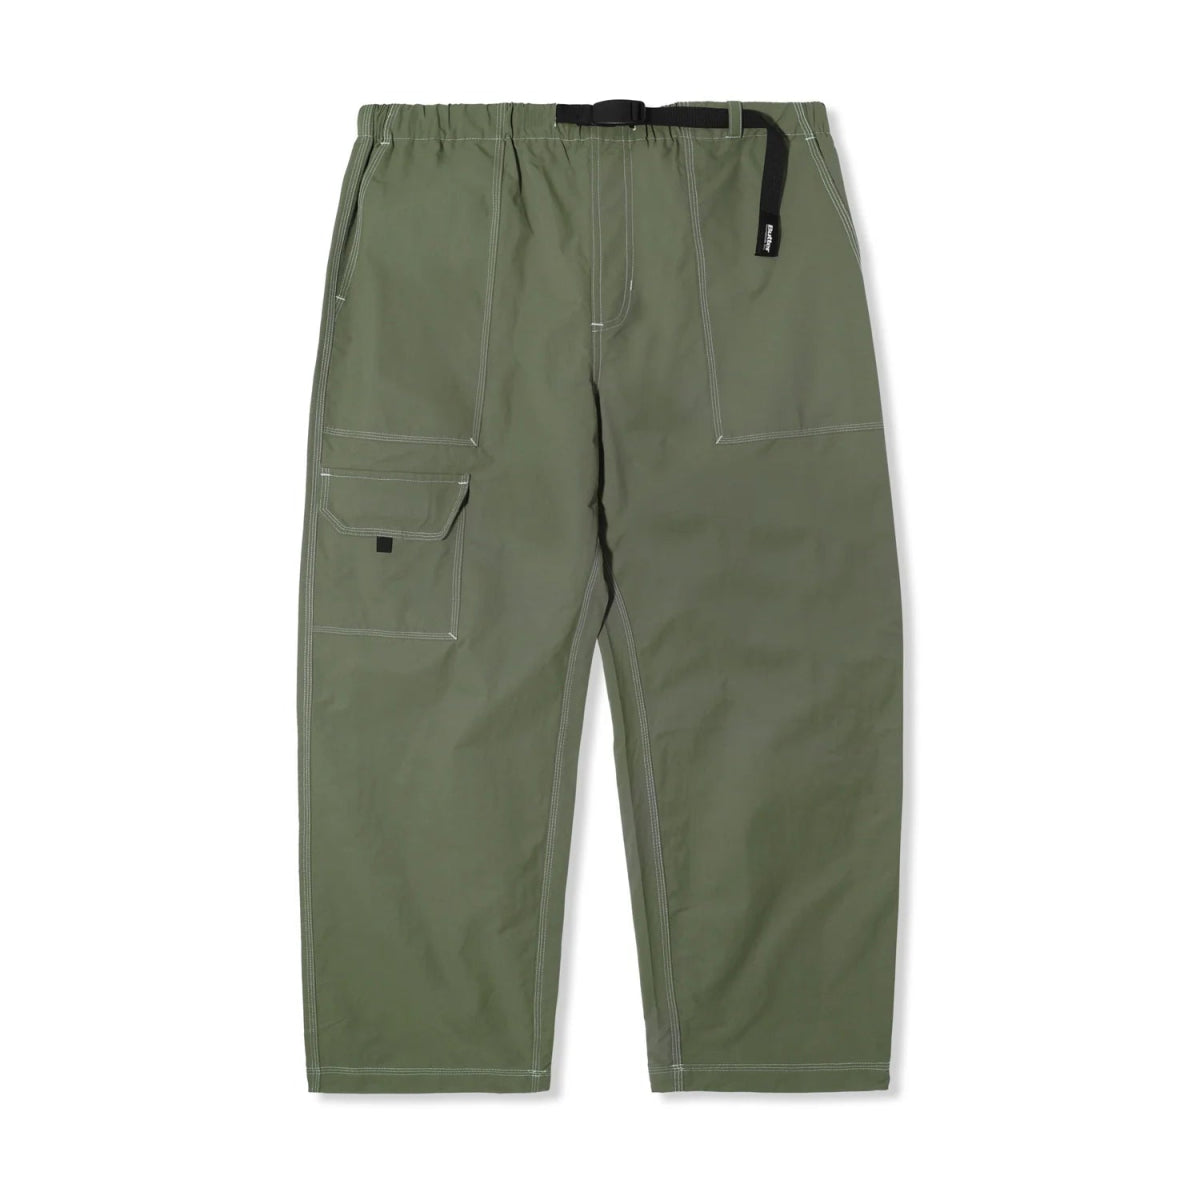 Butter Goods Climber Pants in Army - Goodnews Skateshop